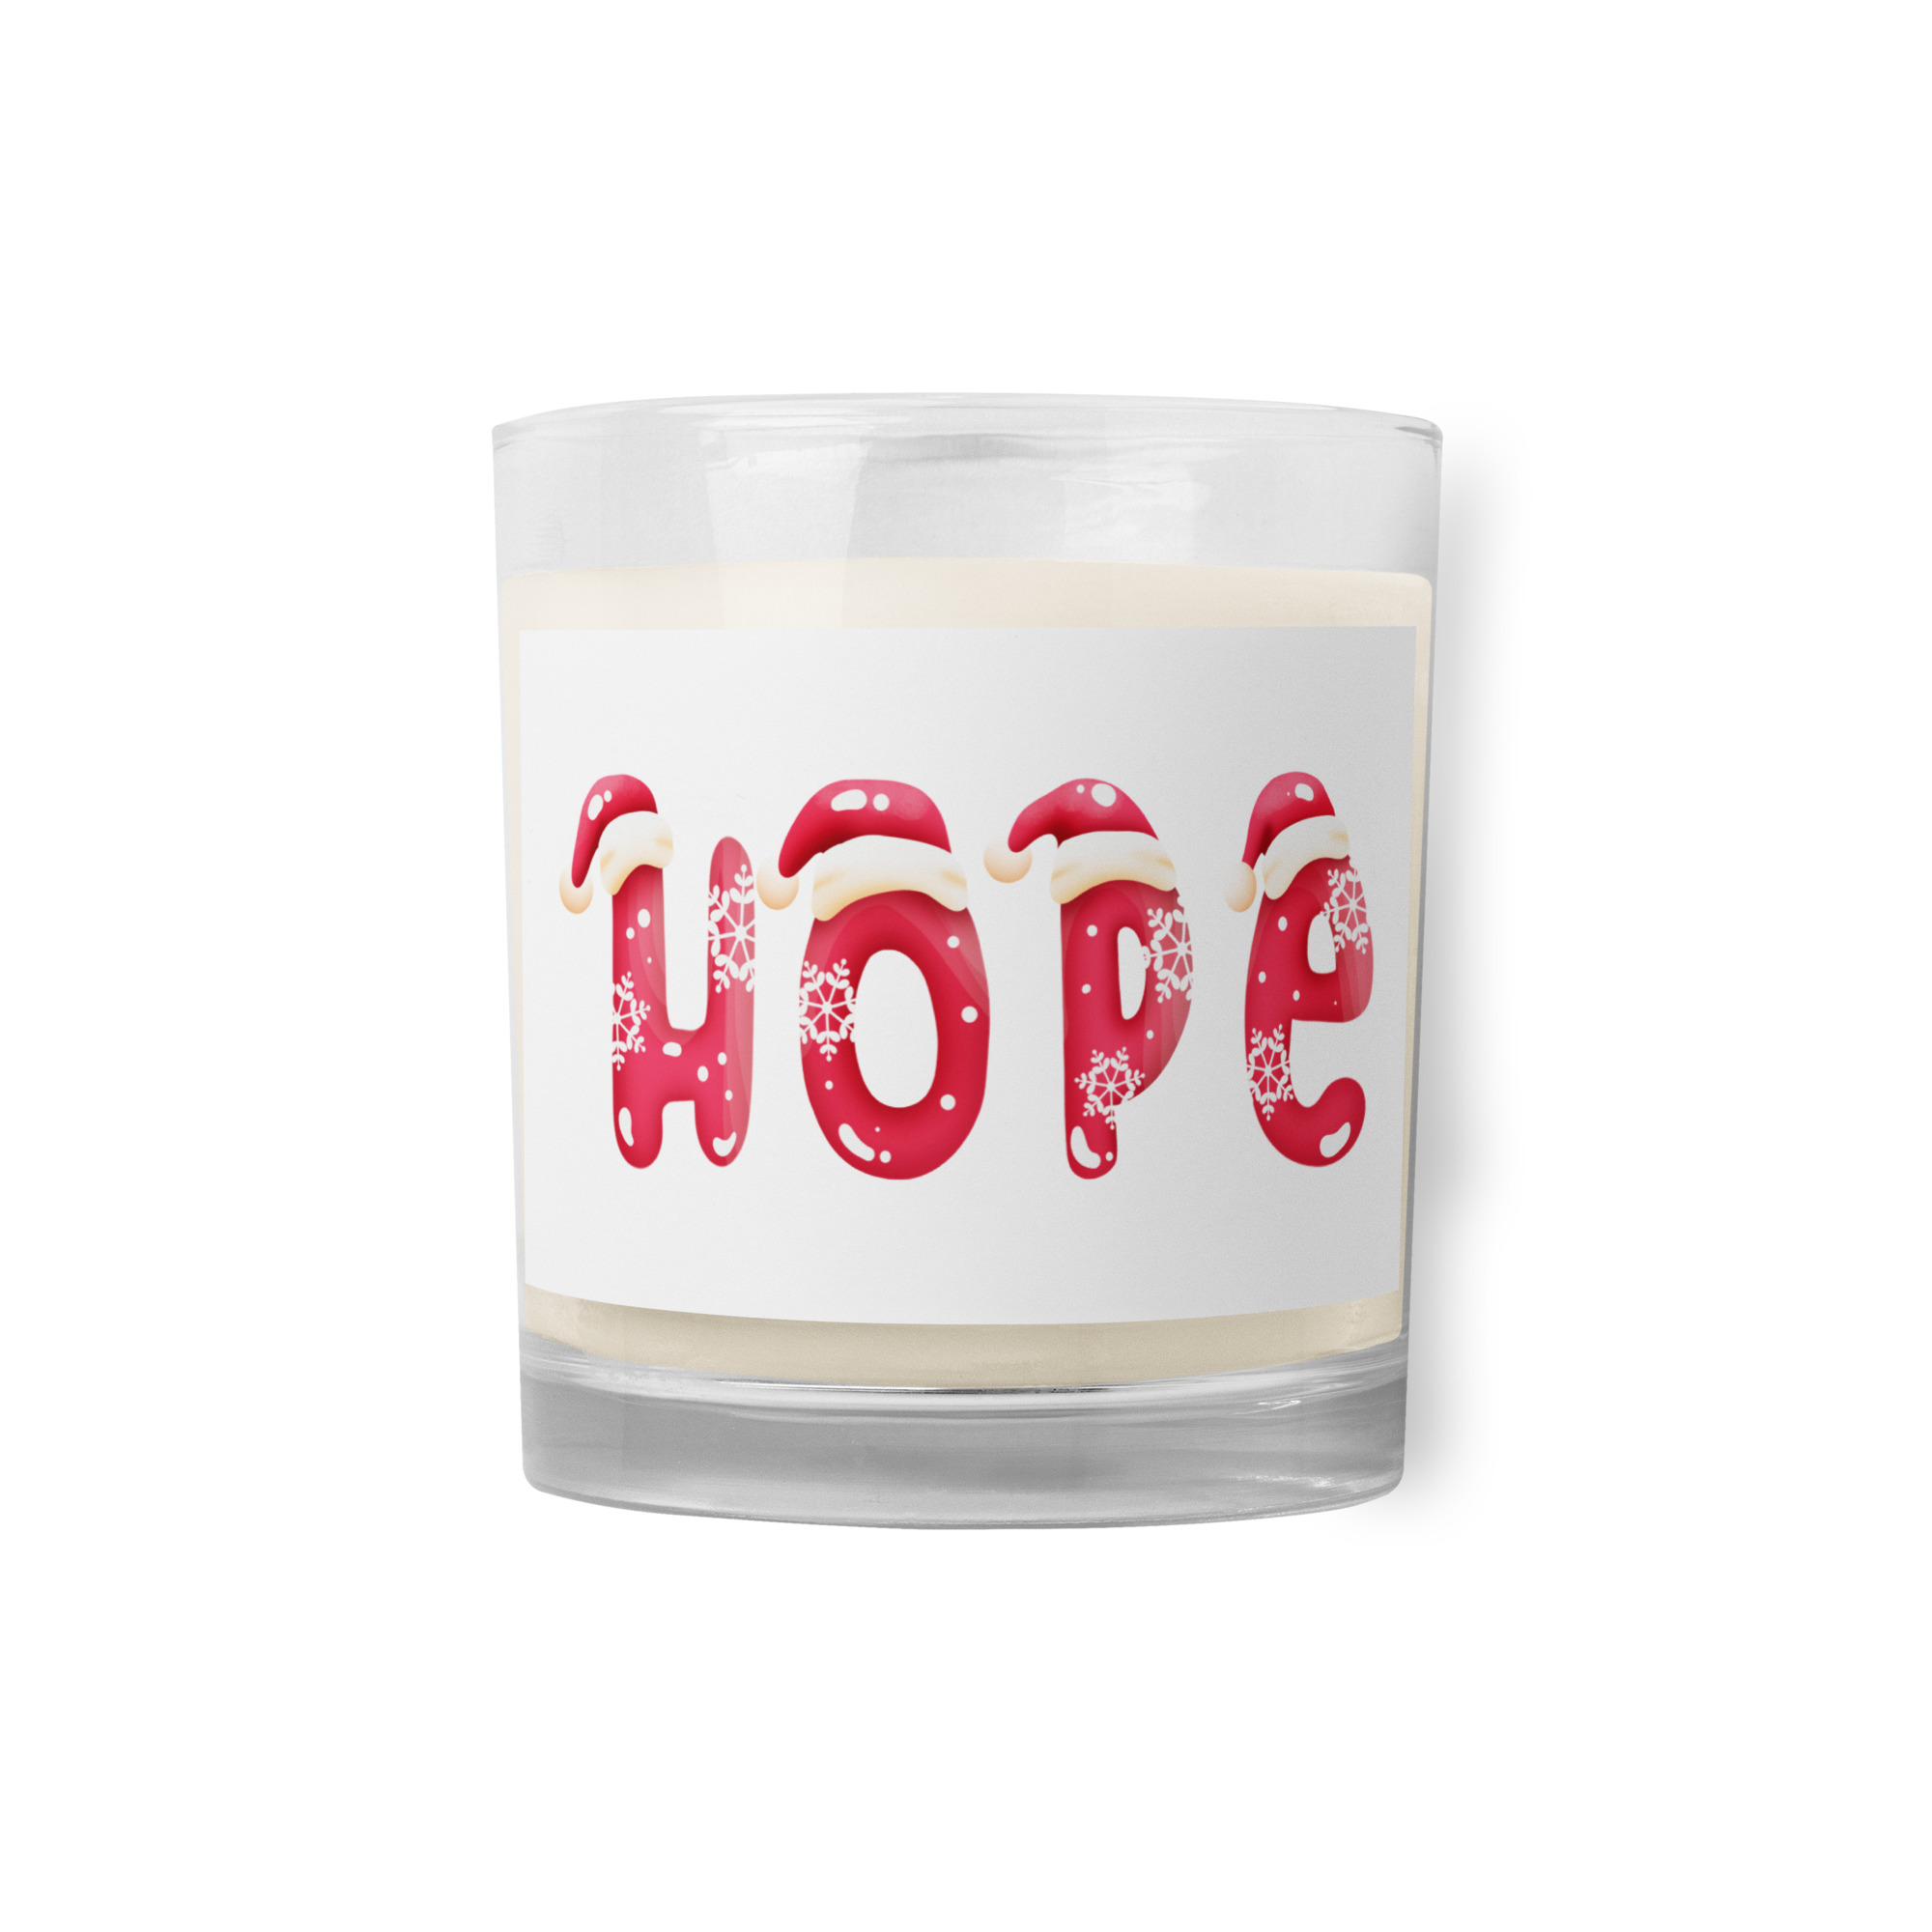 glass-jar-soy-wax-candle-white-front-65635adc47f9d.jpg